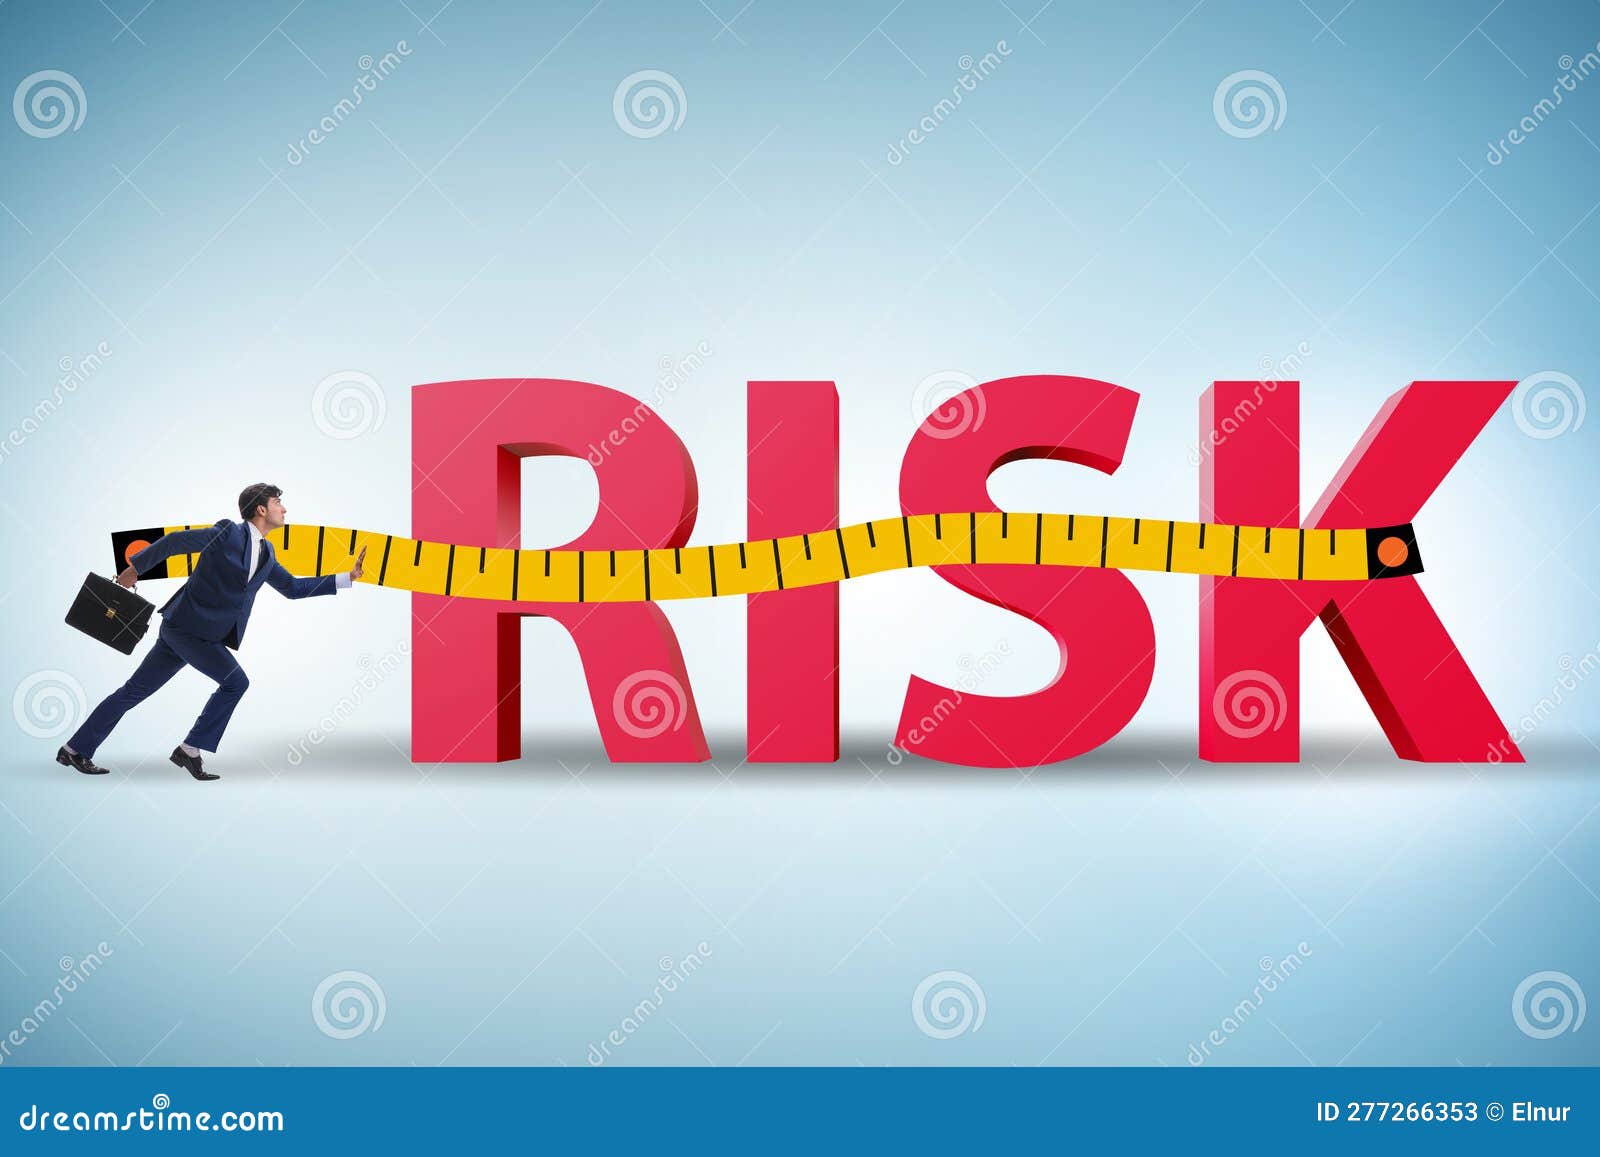 Risk Measurement and Assessment Concept Stock Image - Image of diagram ...